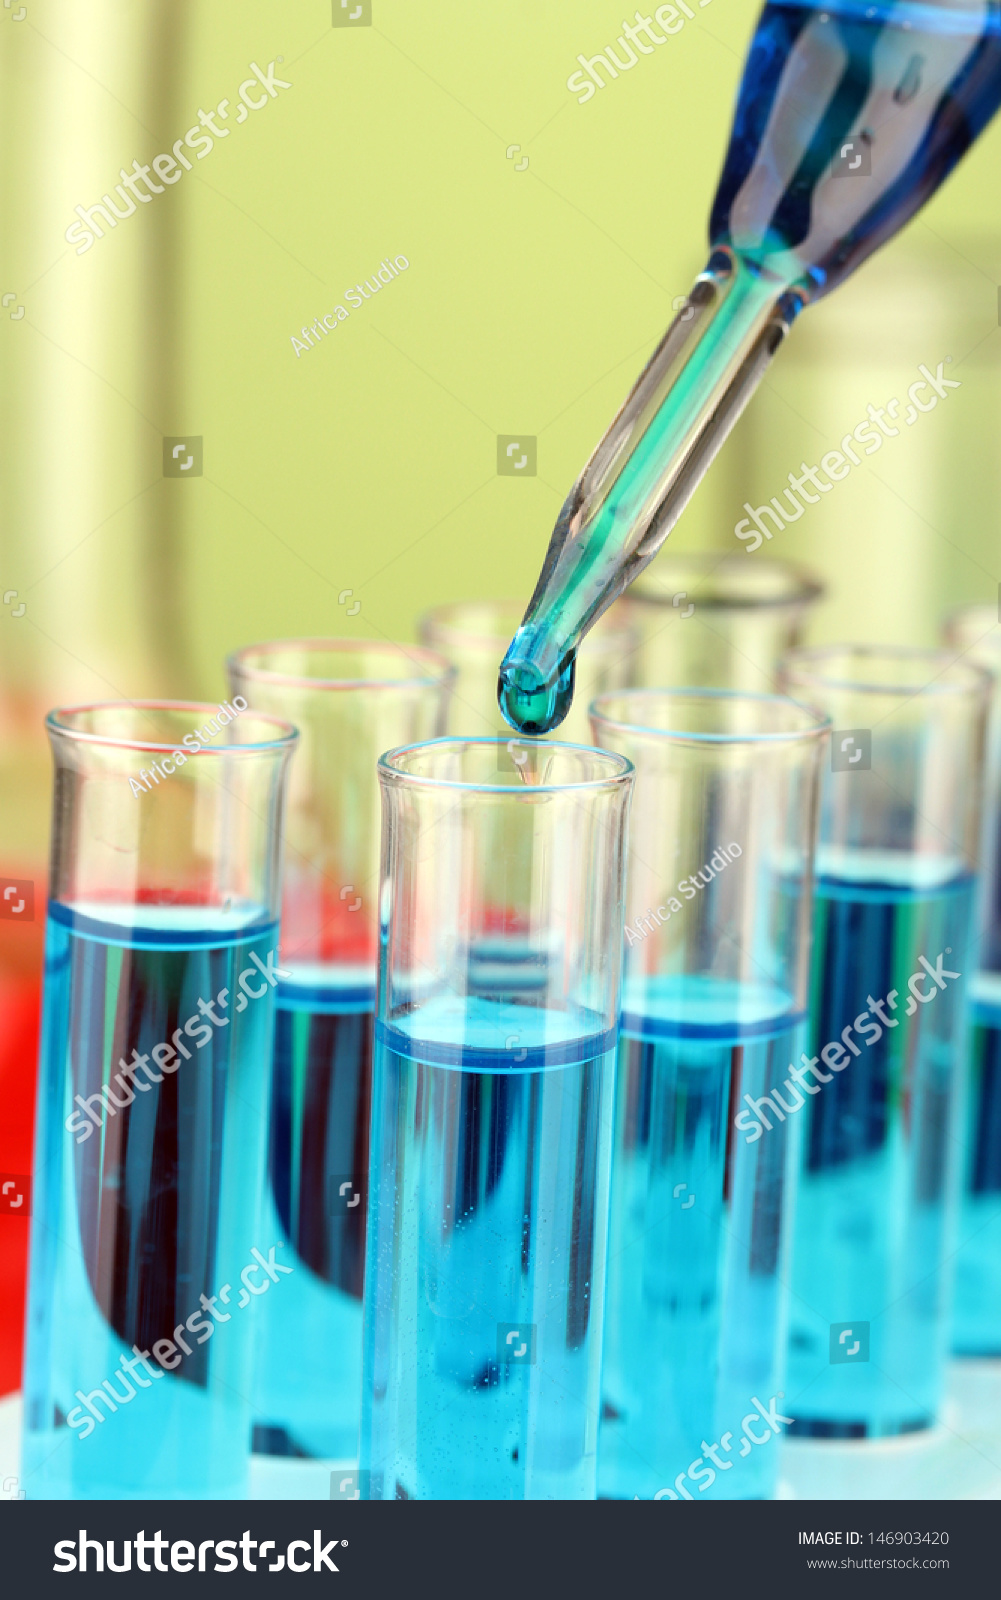 Laboratory pipette with drop of color liquid over glass test tubes, close up #146903420